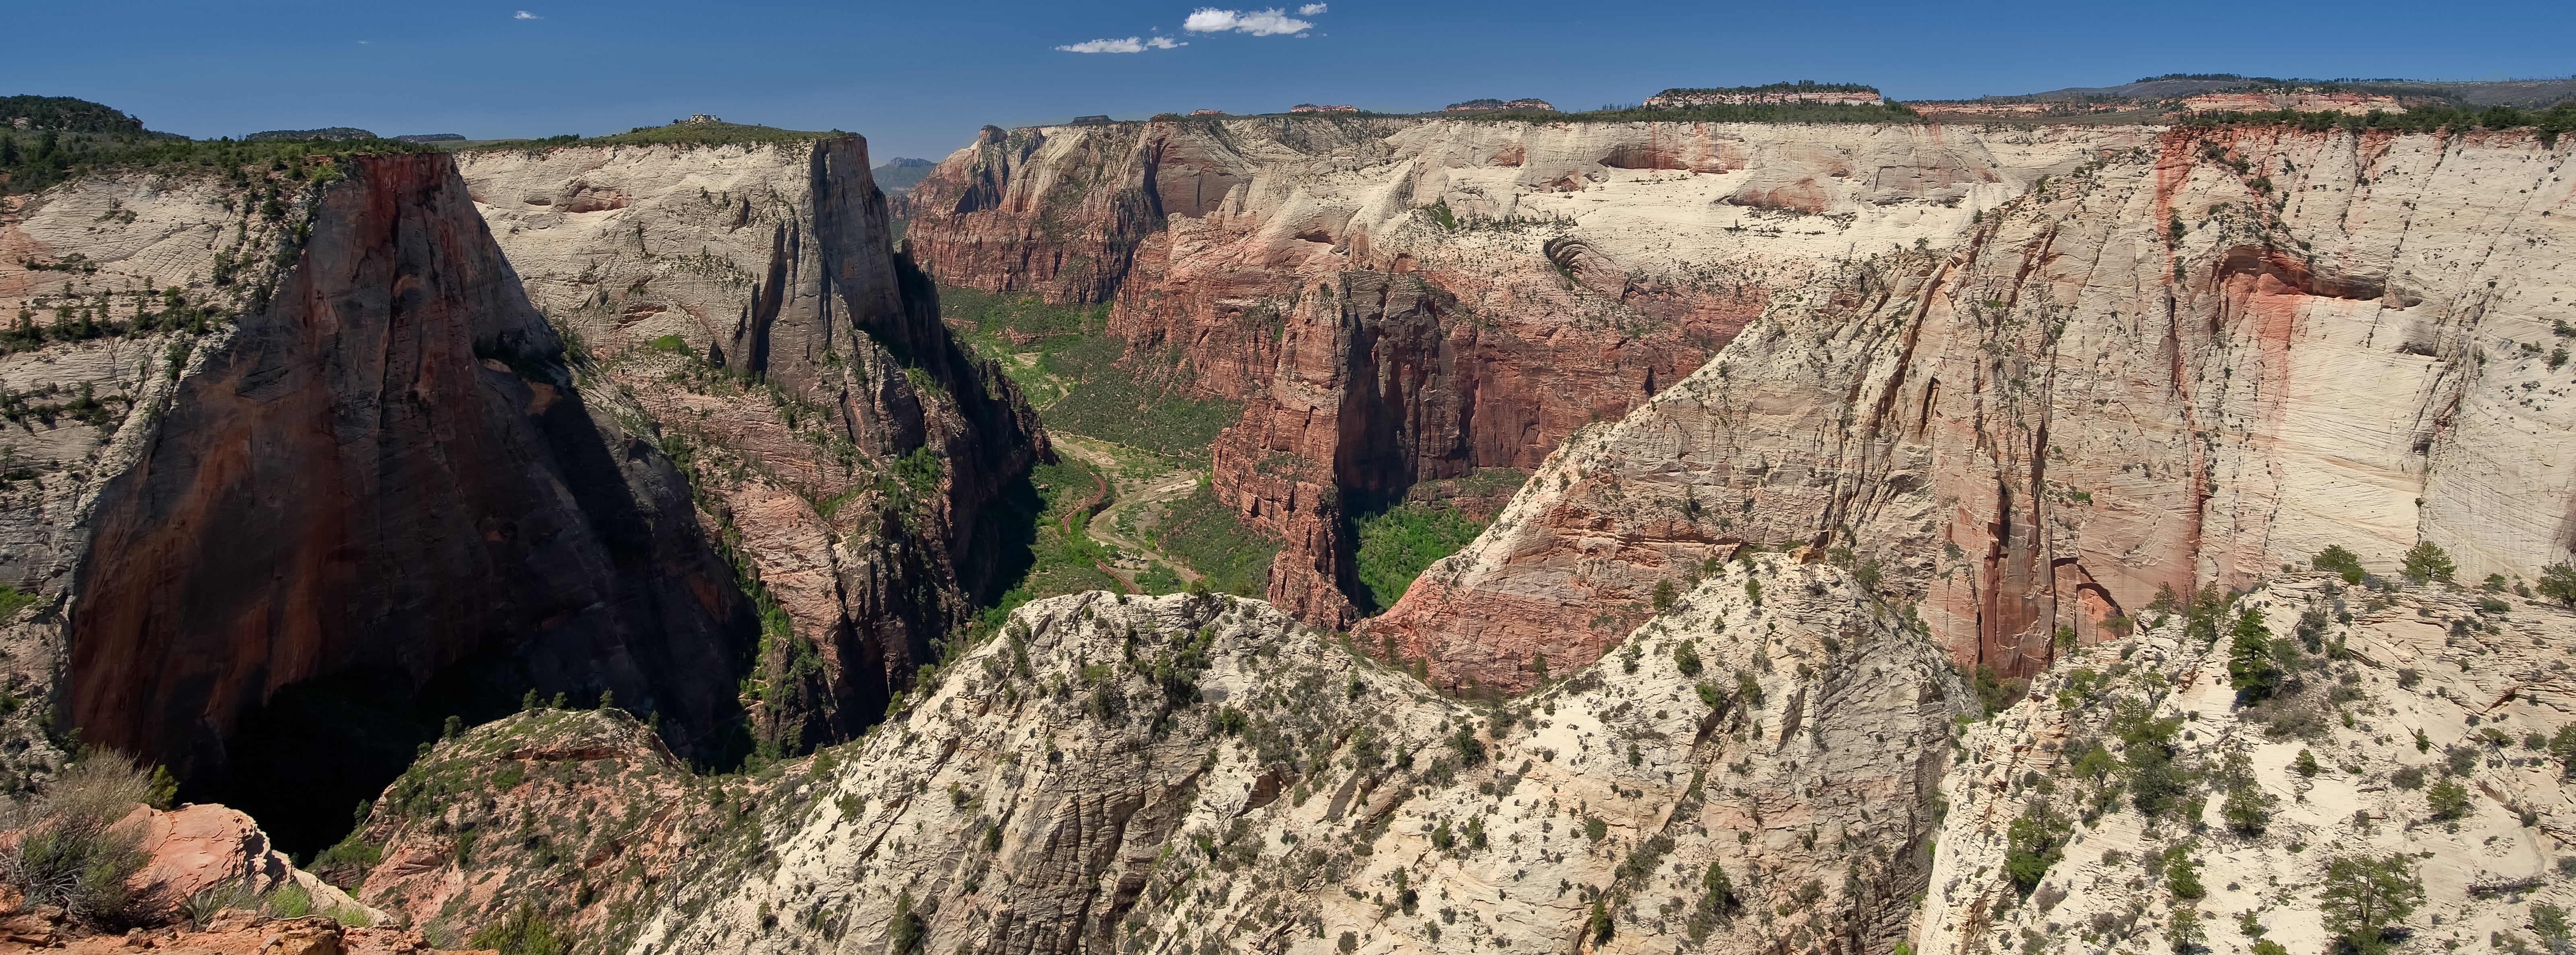 Zion National Park Observation Point, rocky mountains, United States